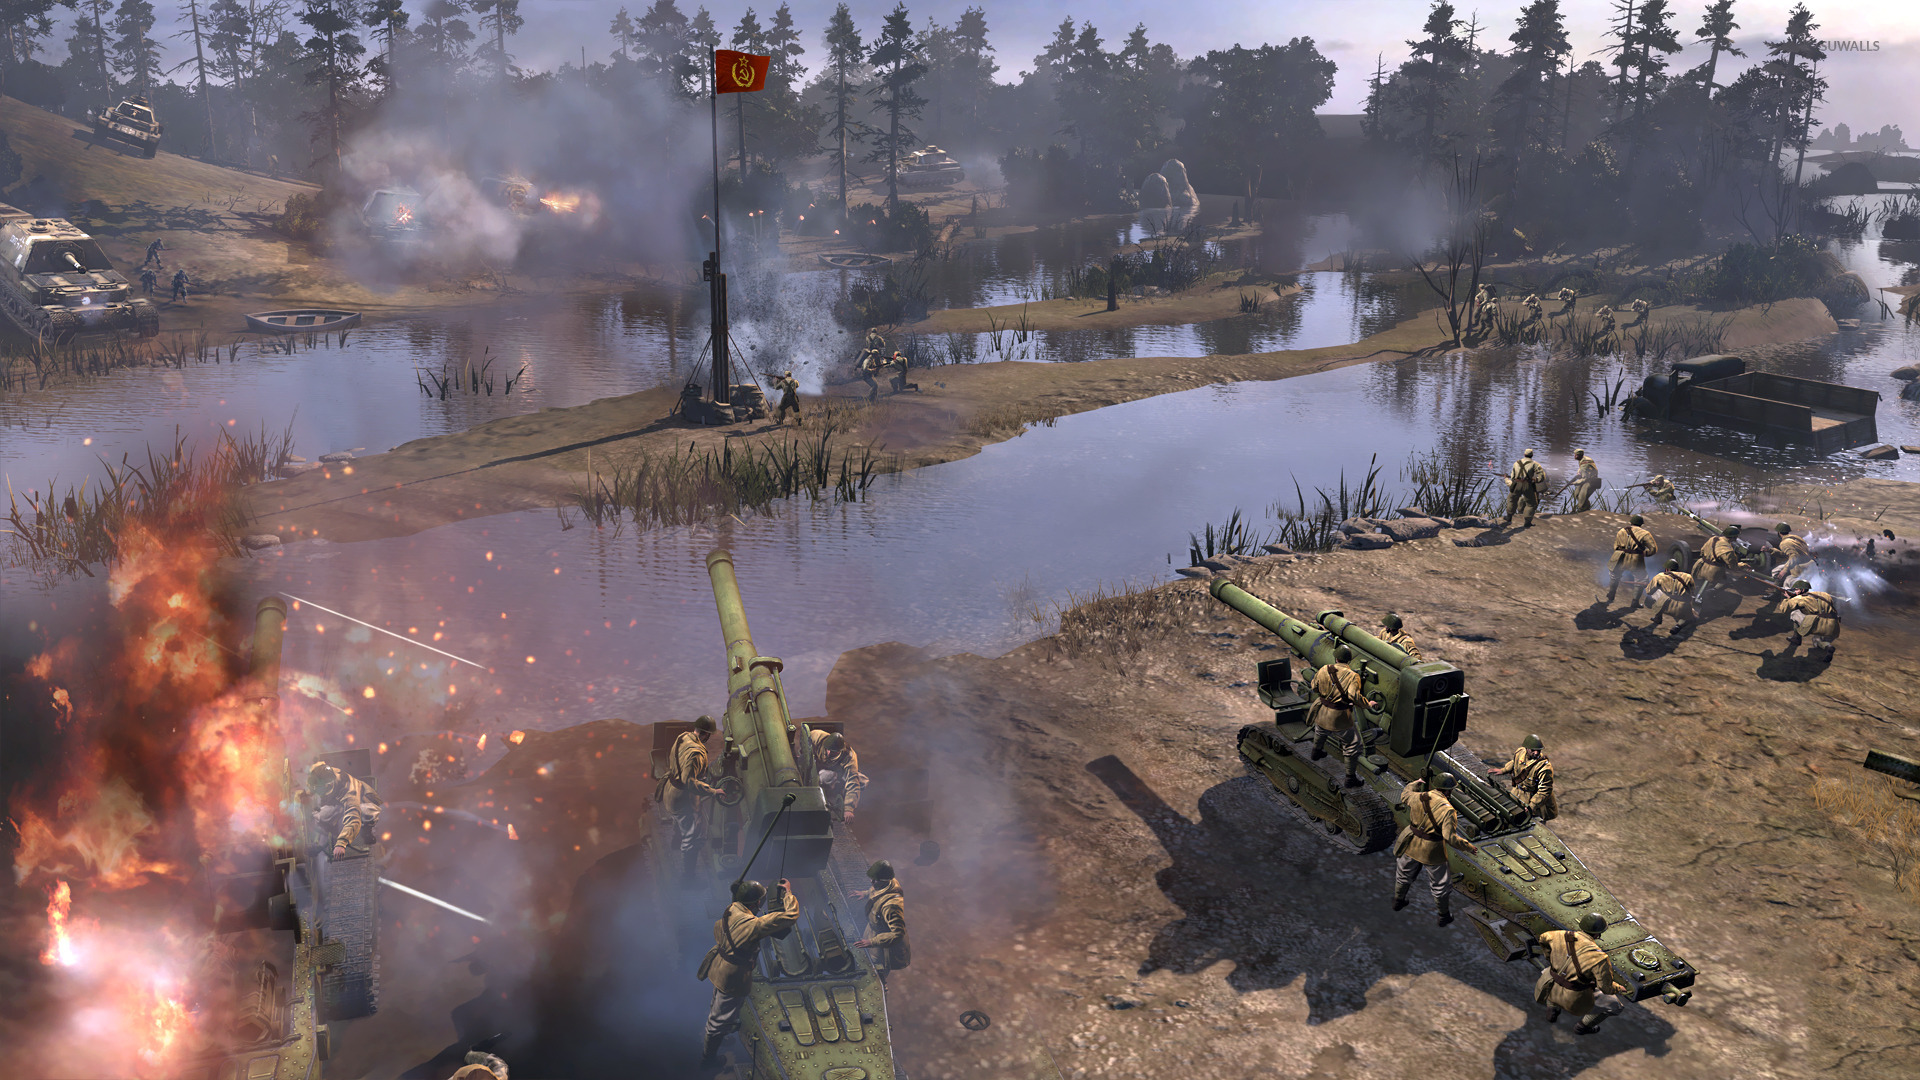 windows 10 company of heroes 2 lose mouse poniter